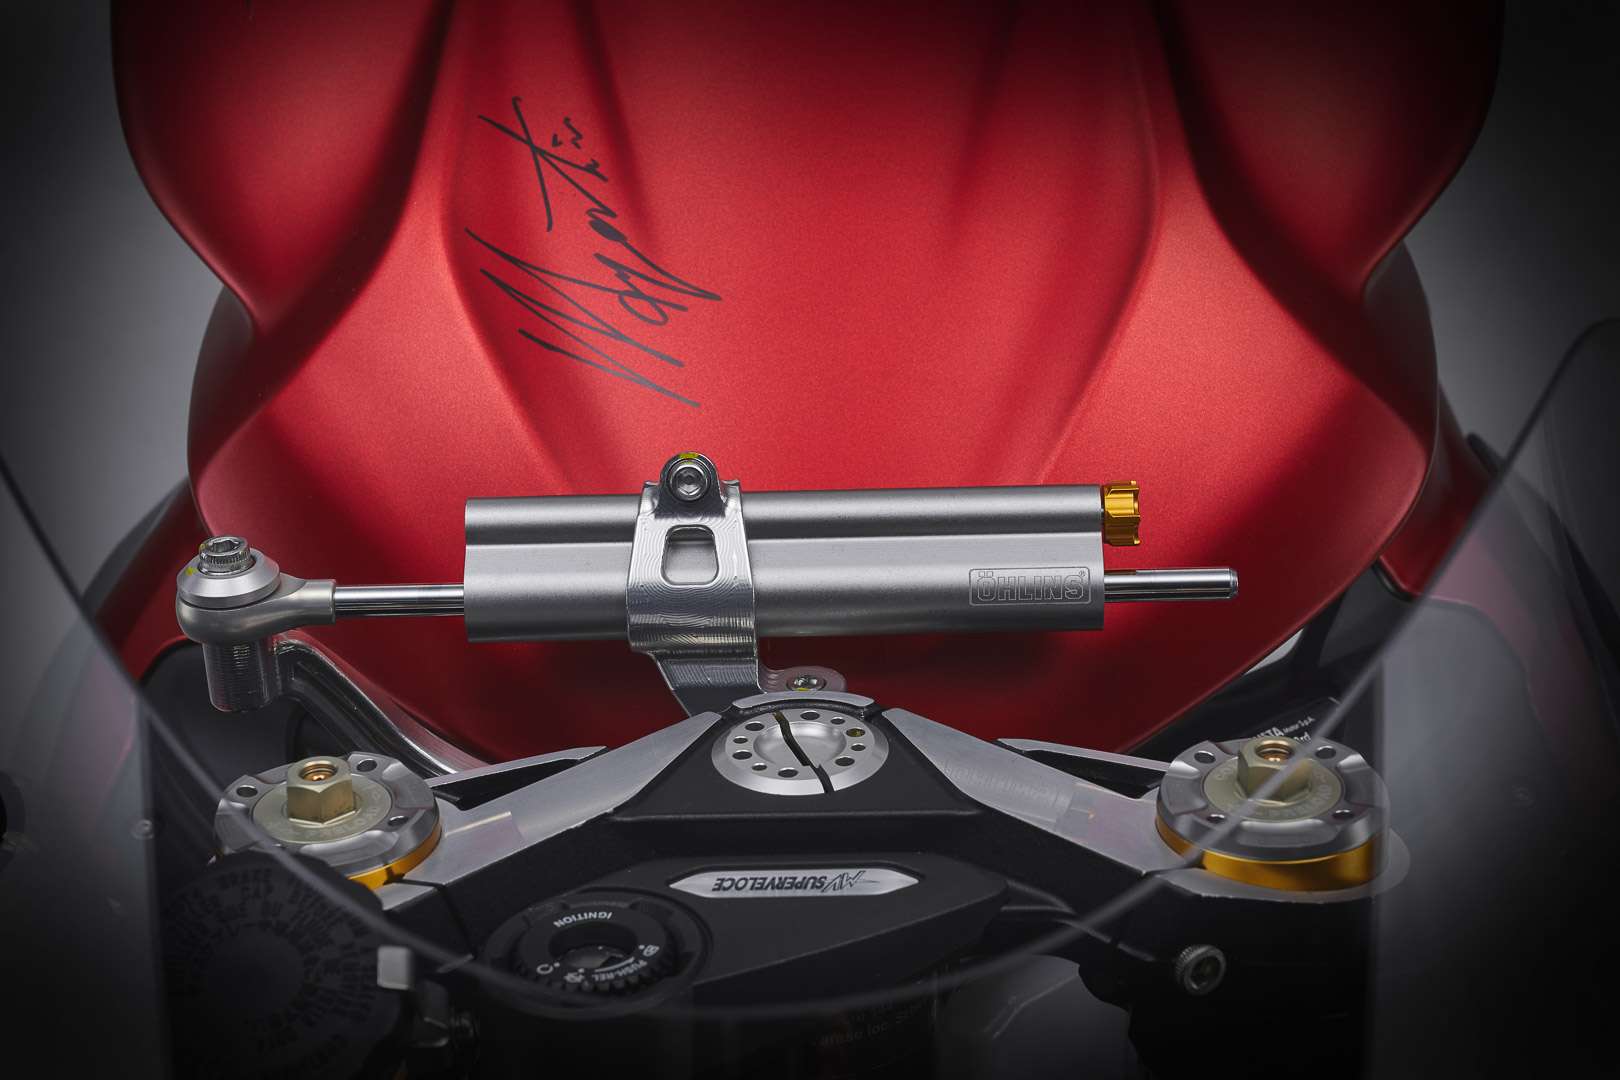 2022-mv-agusta-superveloce-ago-first-look-giacomo-supersport-motorcycle-limited-edition-31